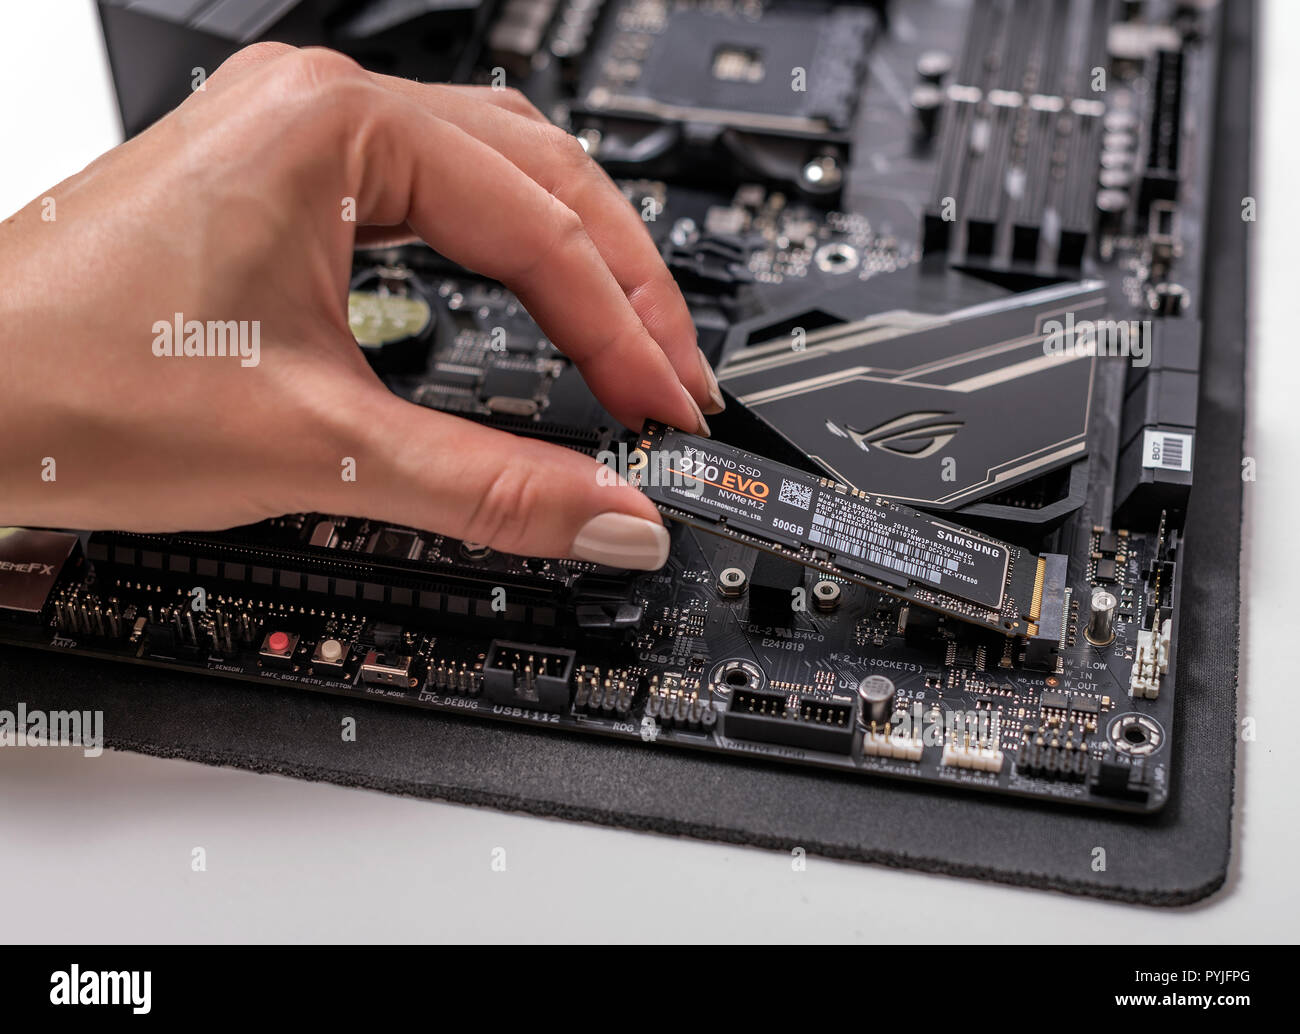 Hard disk SSD m2 on the motherboard background Stock Photo - Alamy